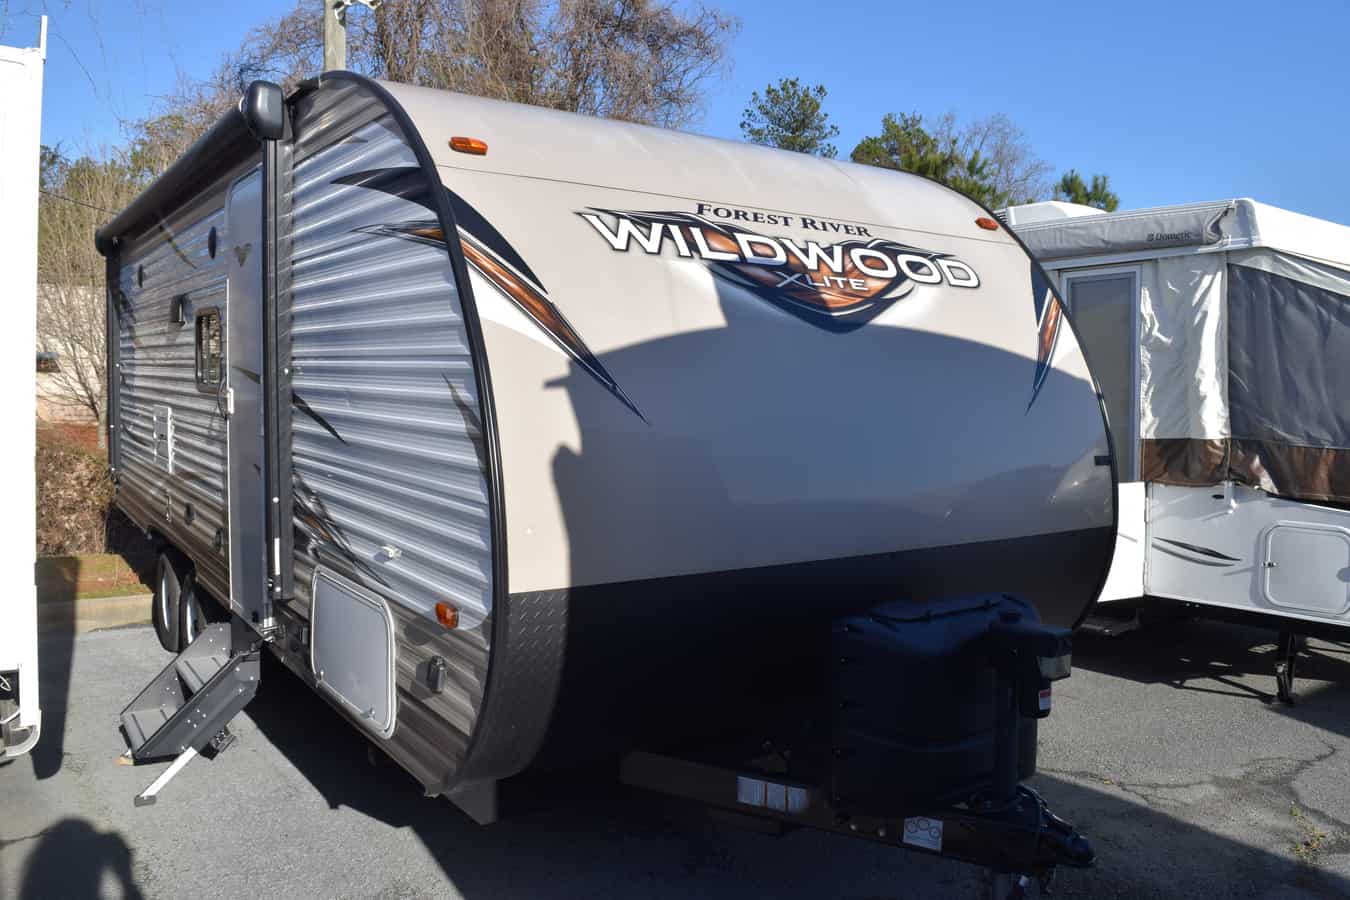 USED 2018 Forest River WILDWOOD 230BH